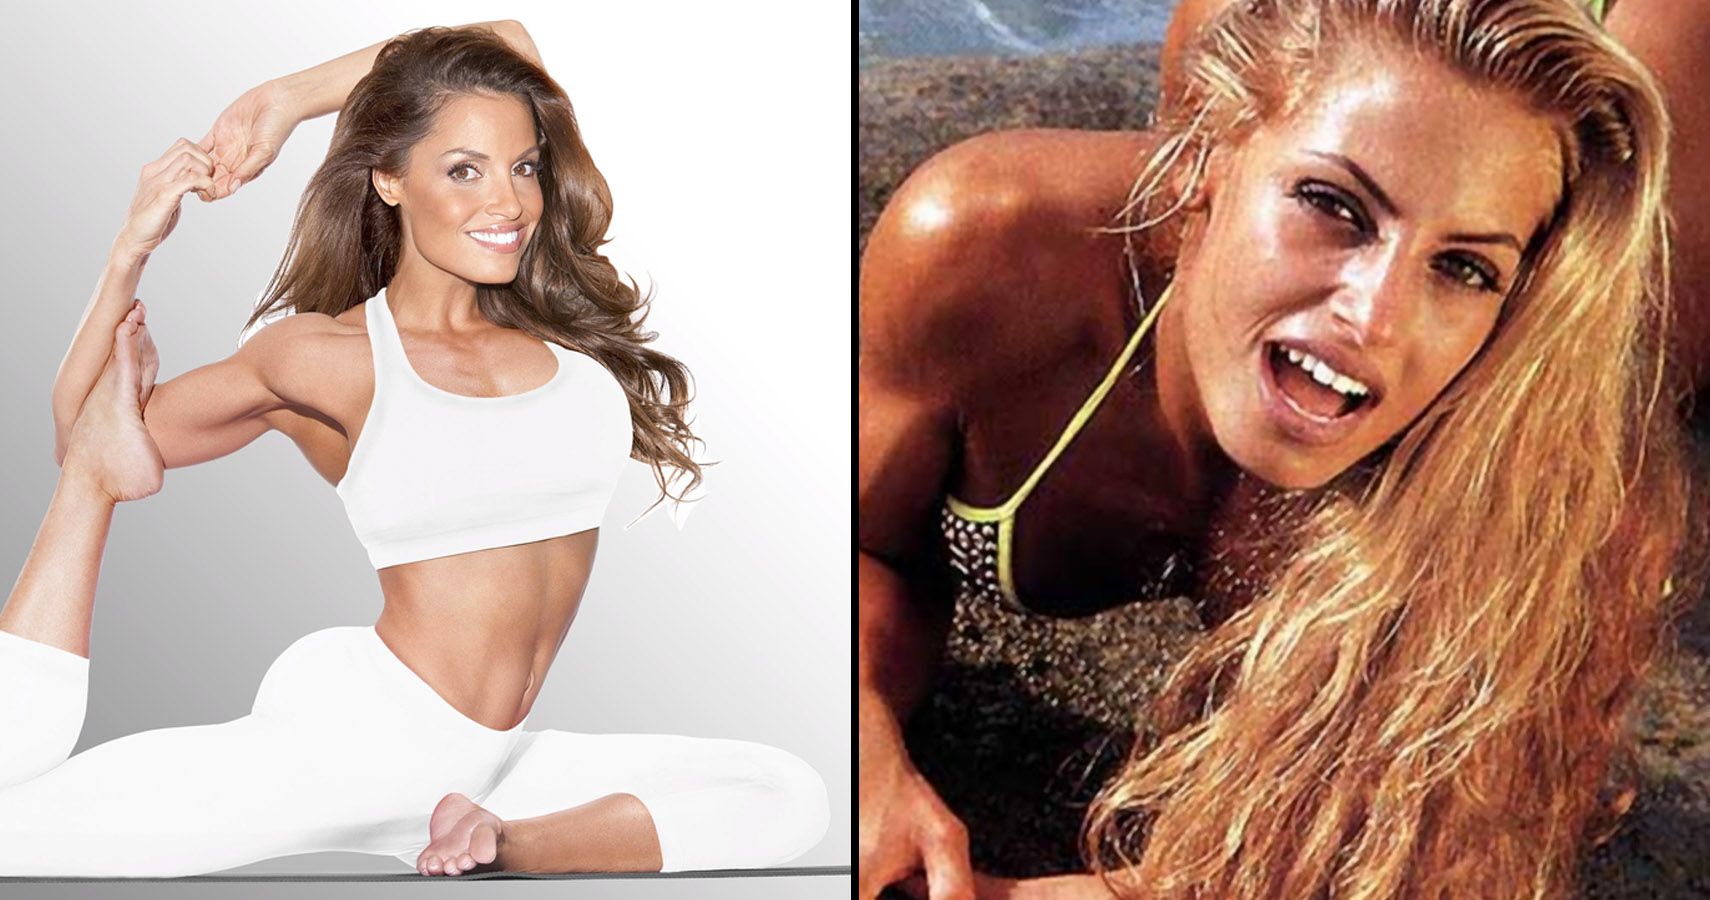 Trish Stratus - 15 Times Trish Stratus Gave Us More Than We Could Handle